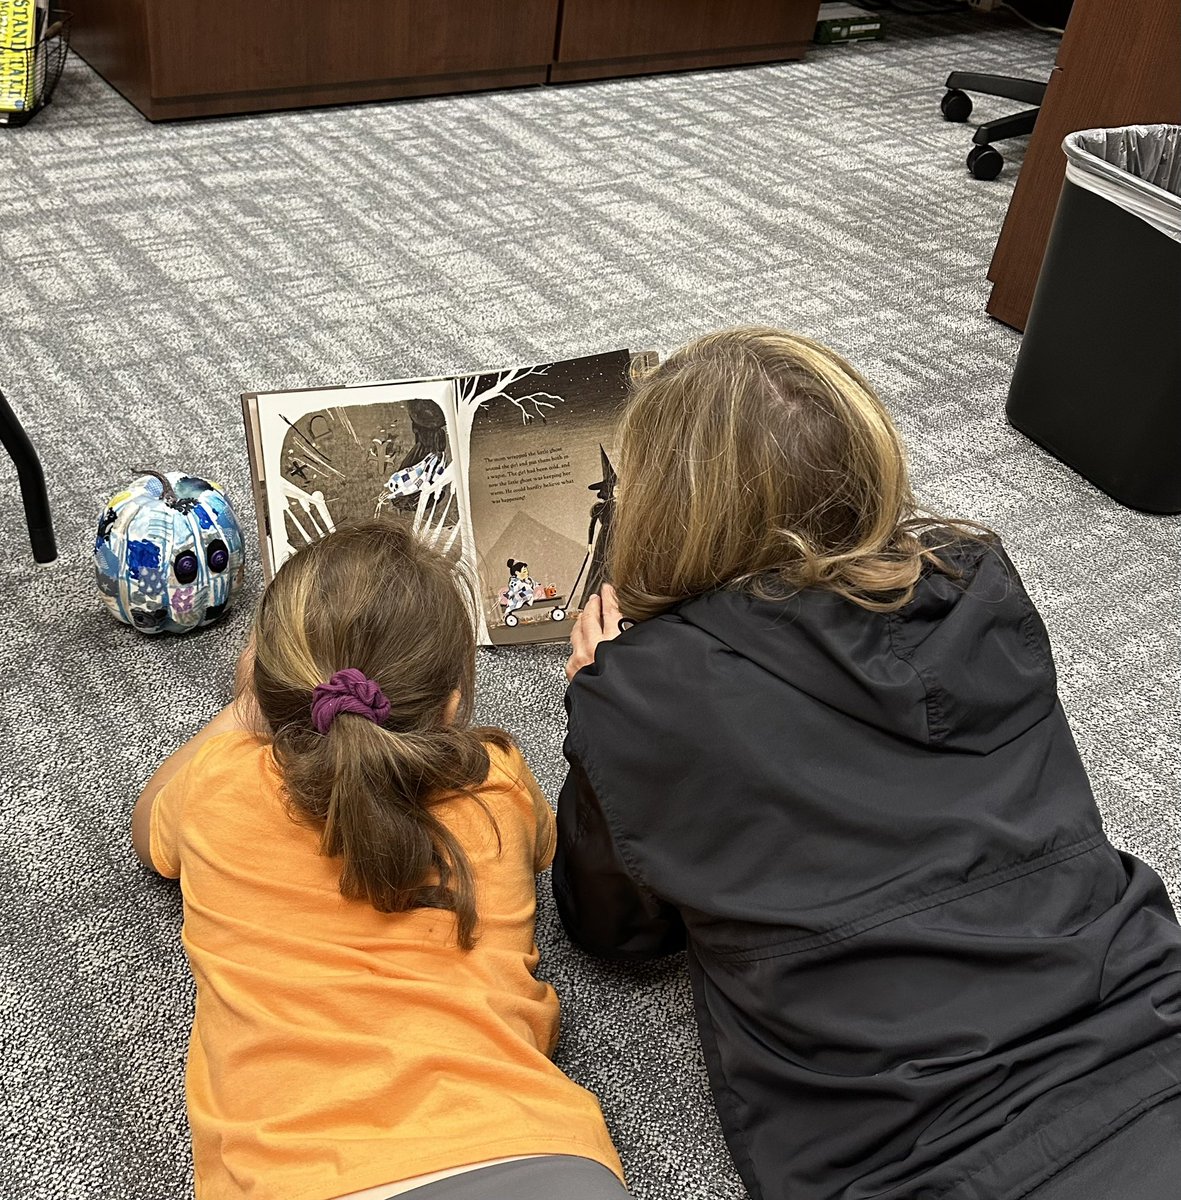 This is exactly what I needed to end the week! This is why we do what we do! Sometimes you just need to lay on the floor and read with a student! It’s important to me that when students come to my office it’s a place where they feel love and connection! #BeTheCompass 🦁